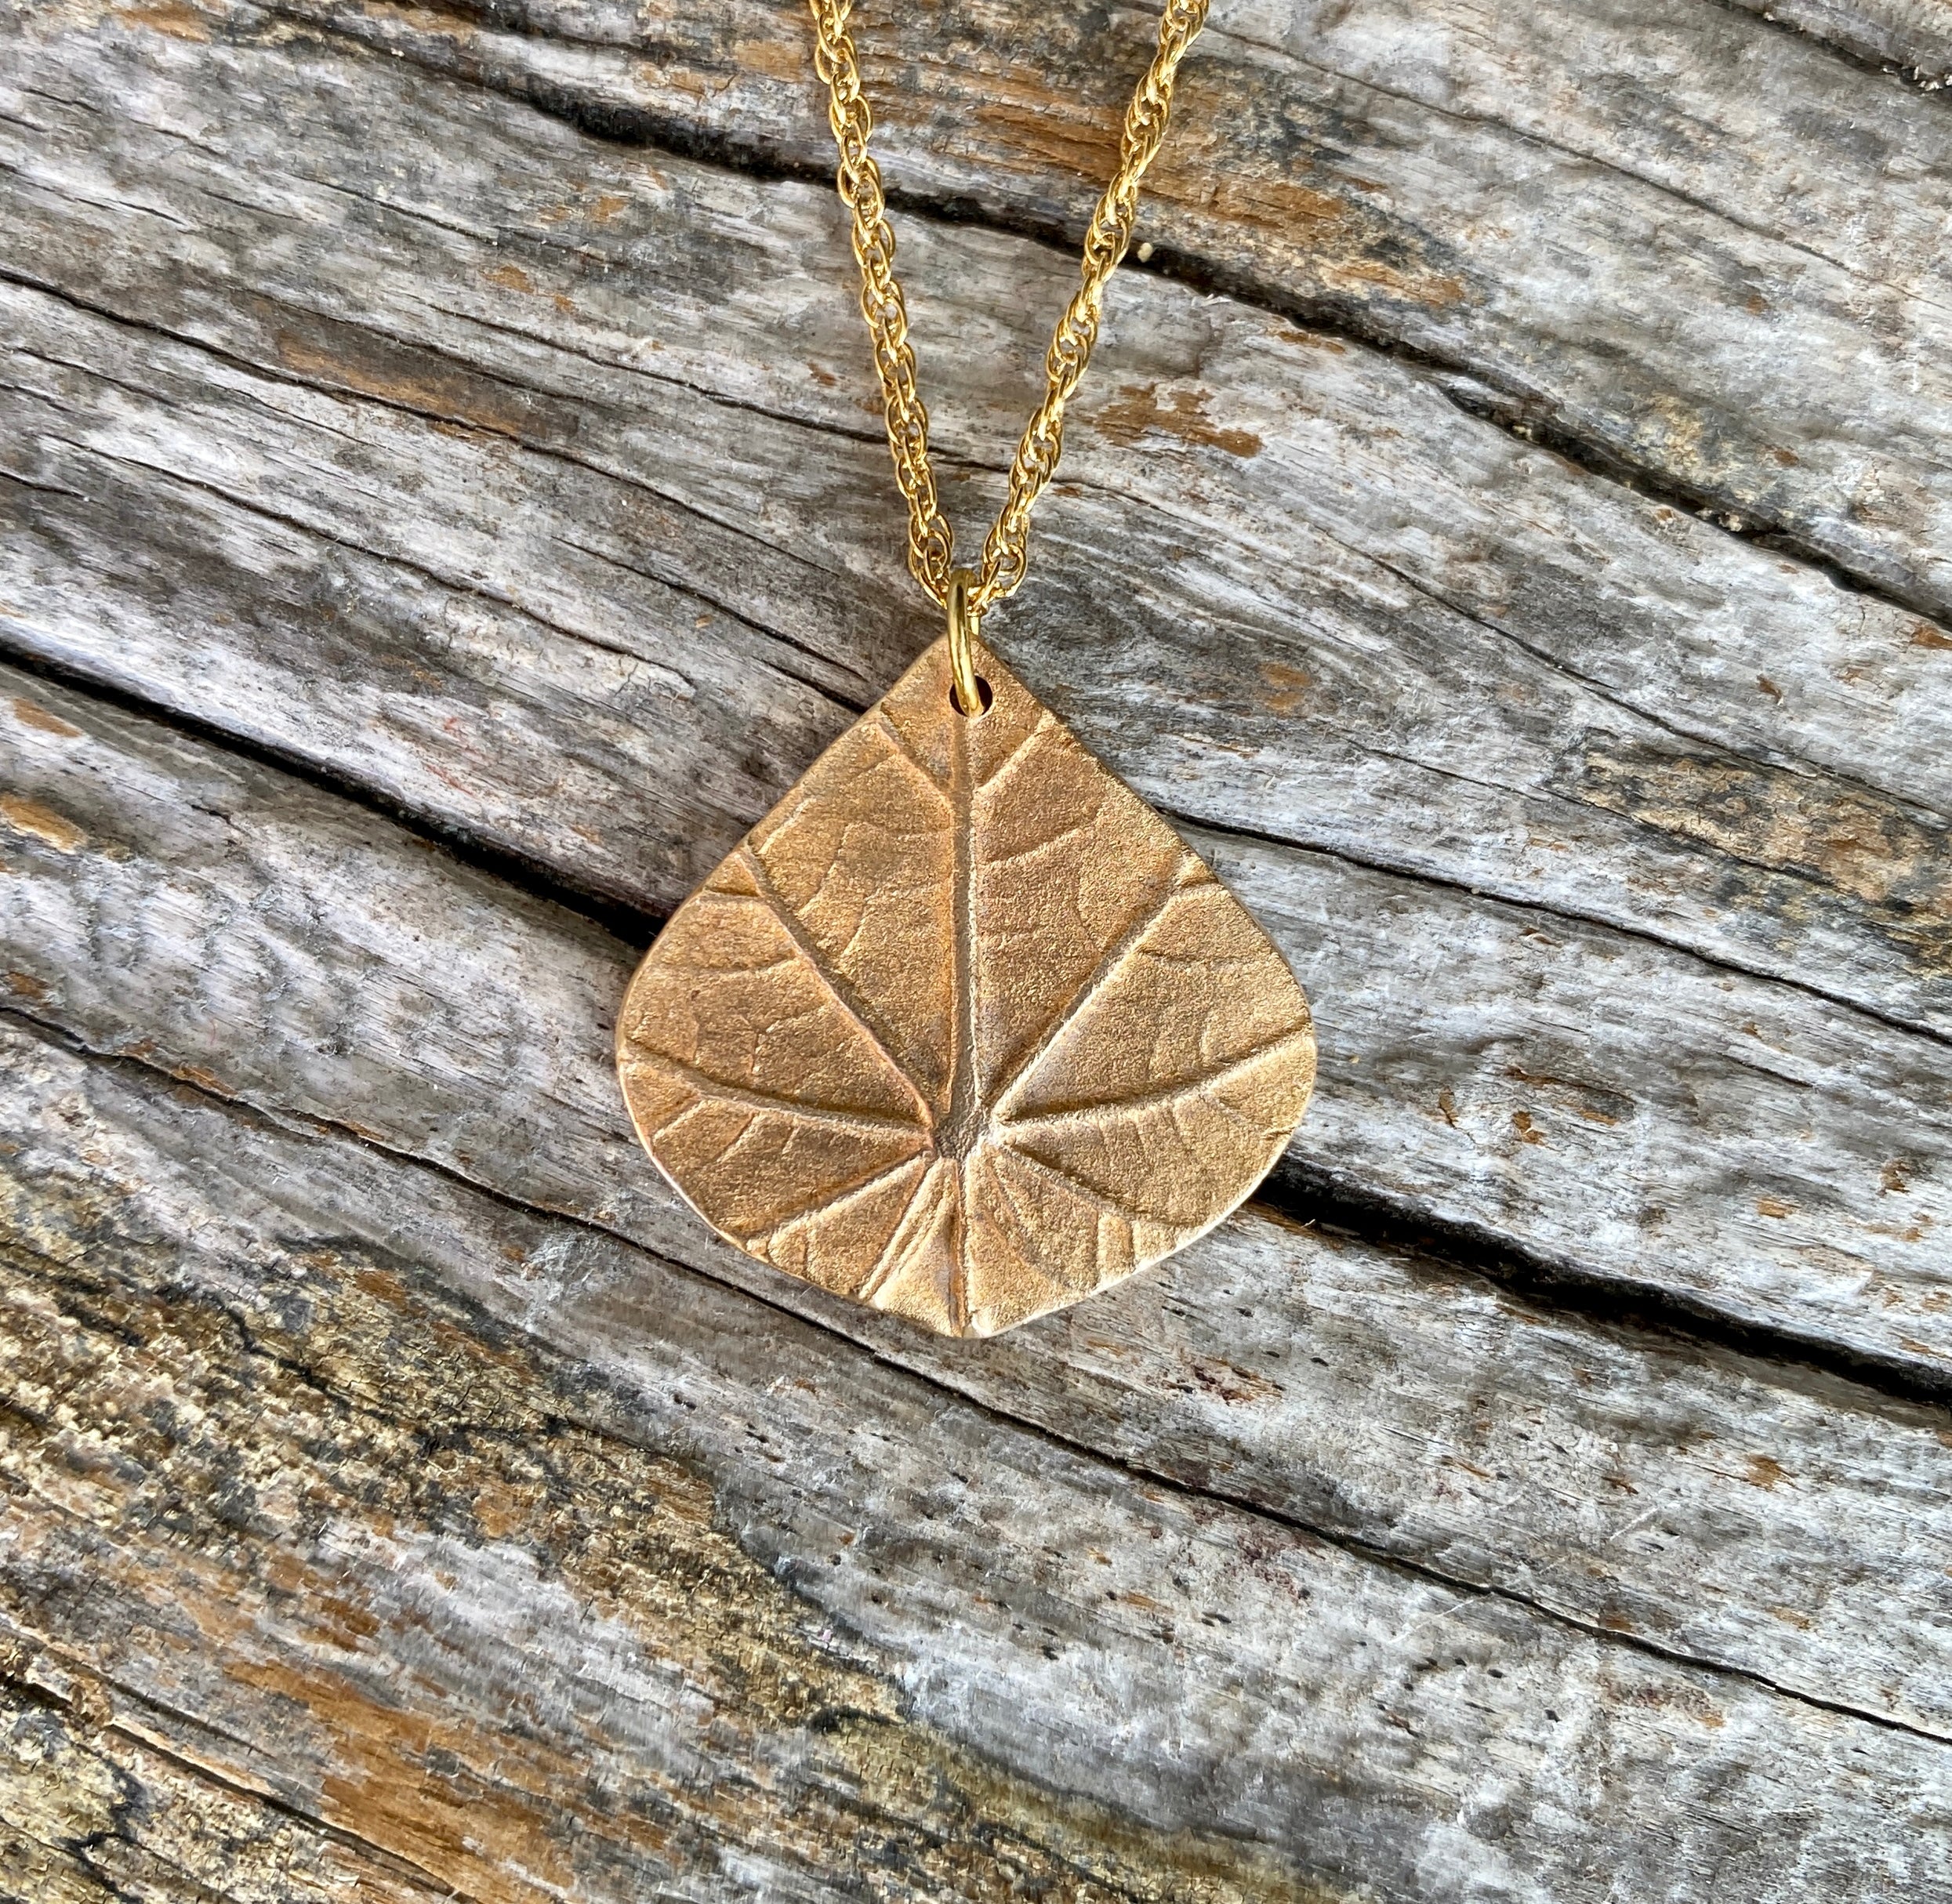 Daily offering 40% off - Linden Tear Drop Pendant!